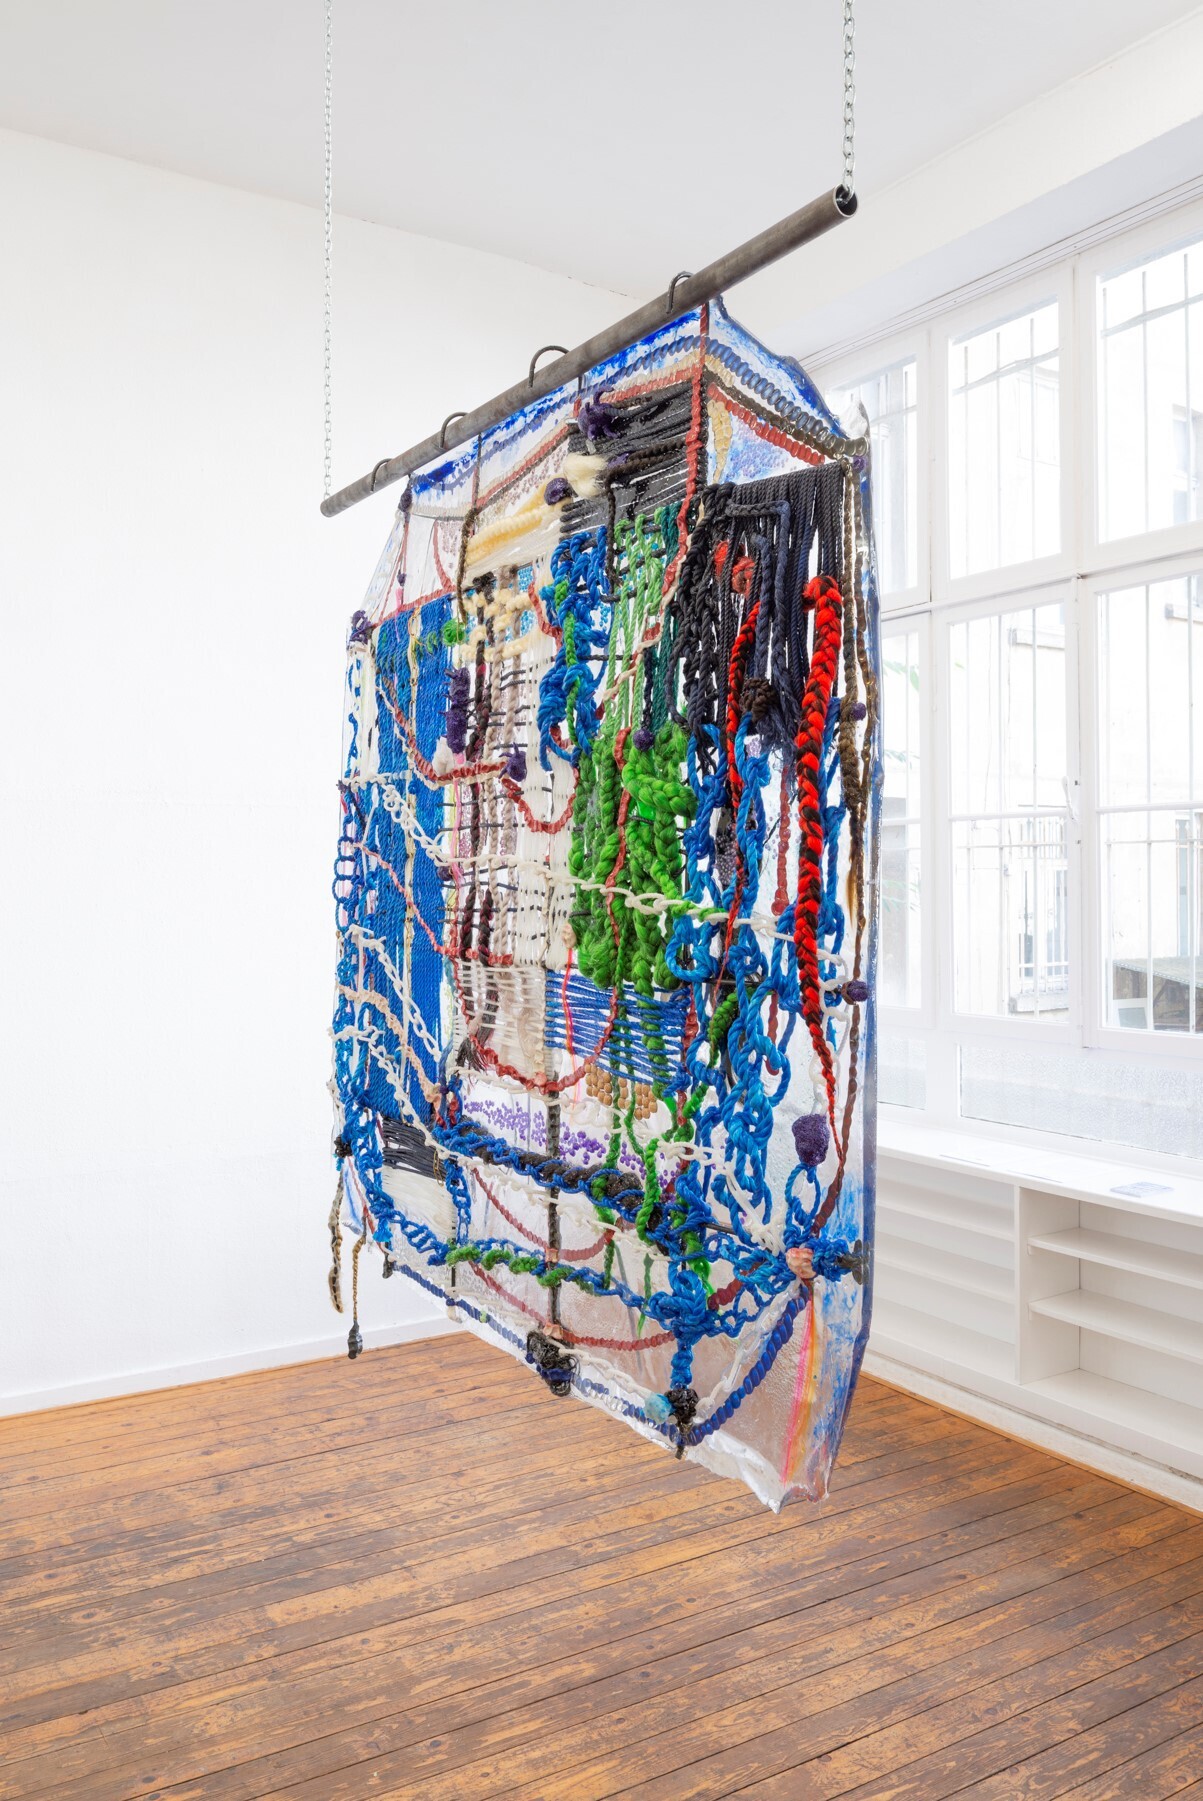 Theresa Weber, Altar Window, 2021, Collage in polyester resin, 175 x 175 cm